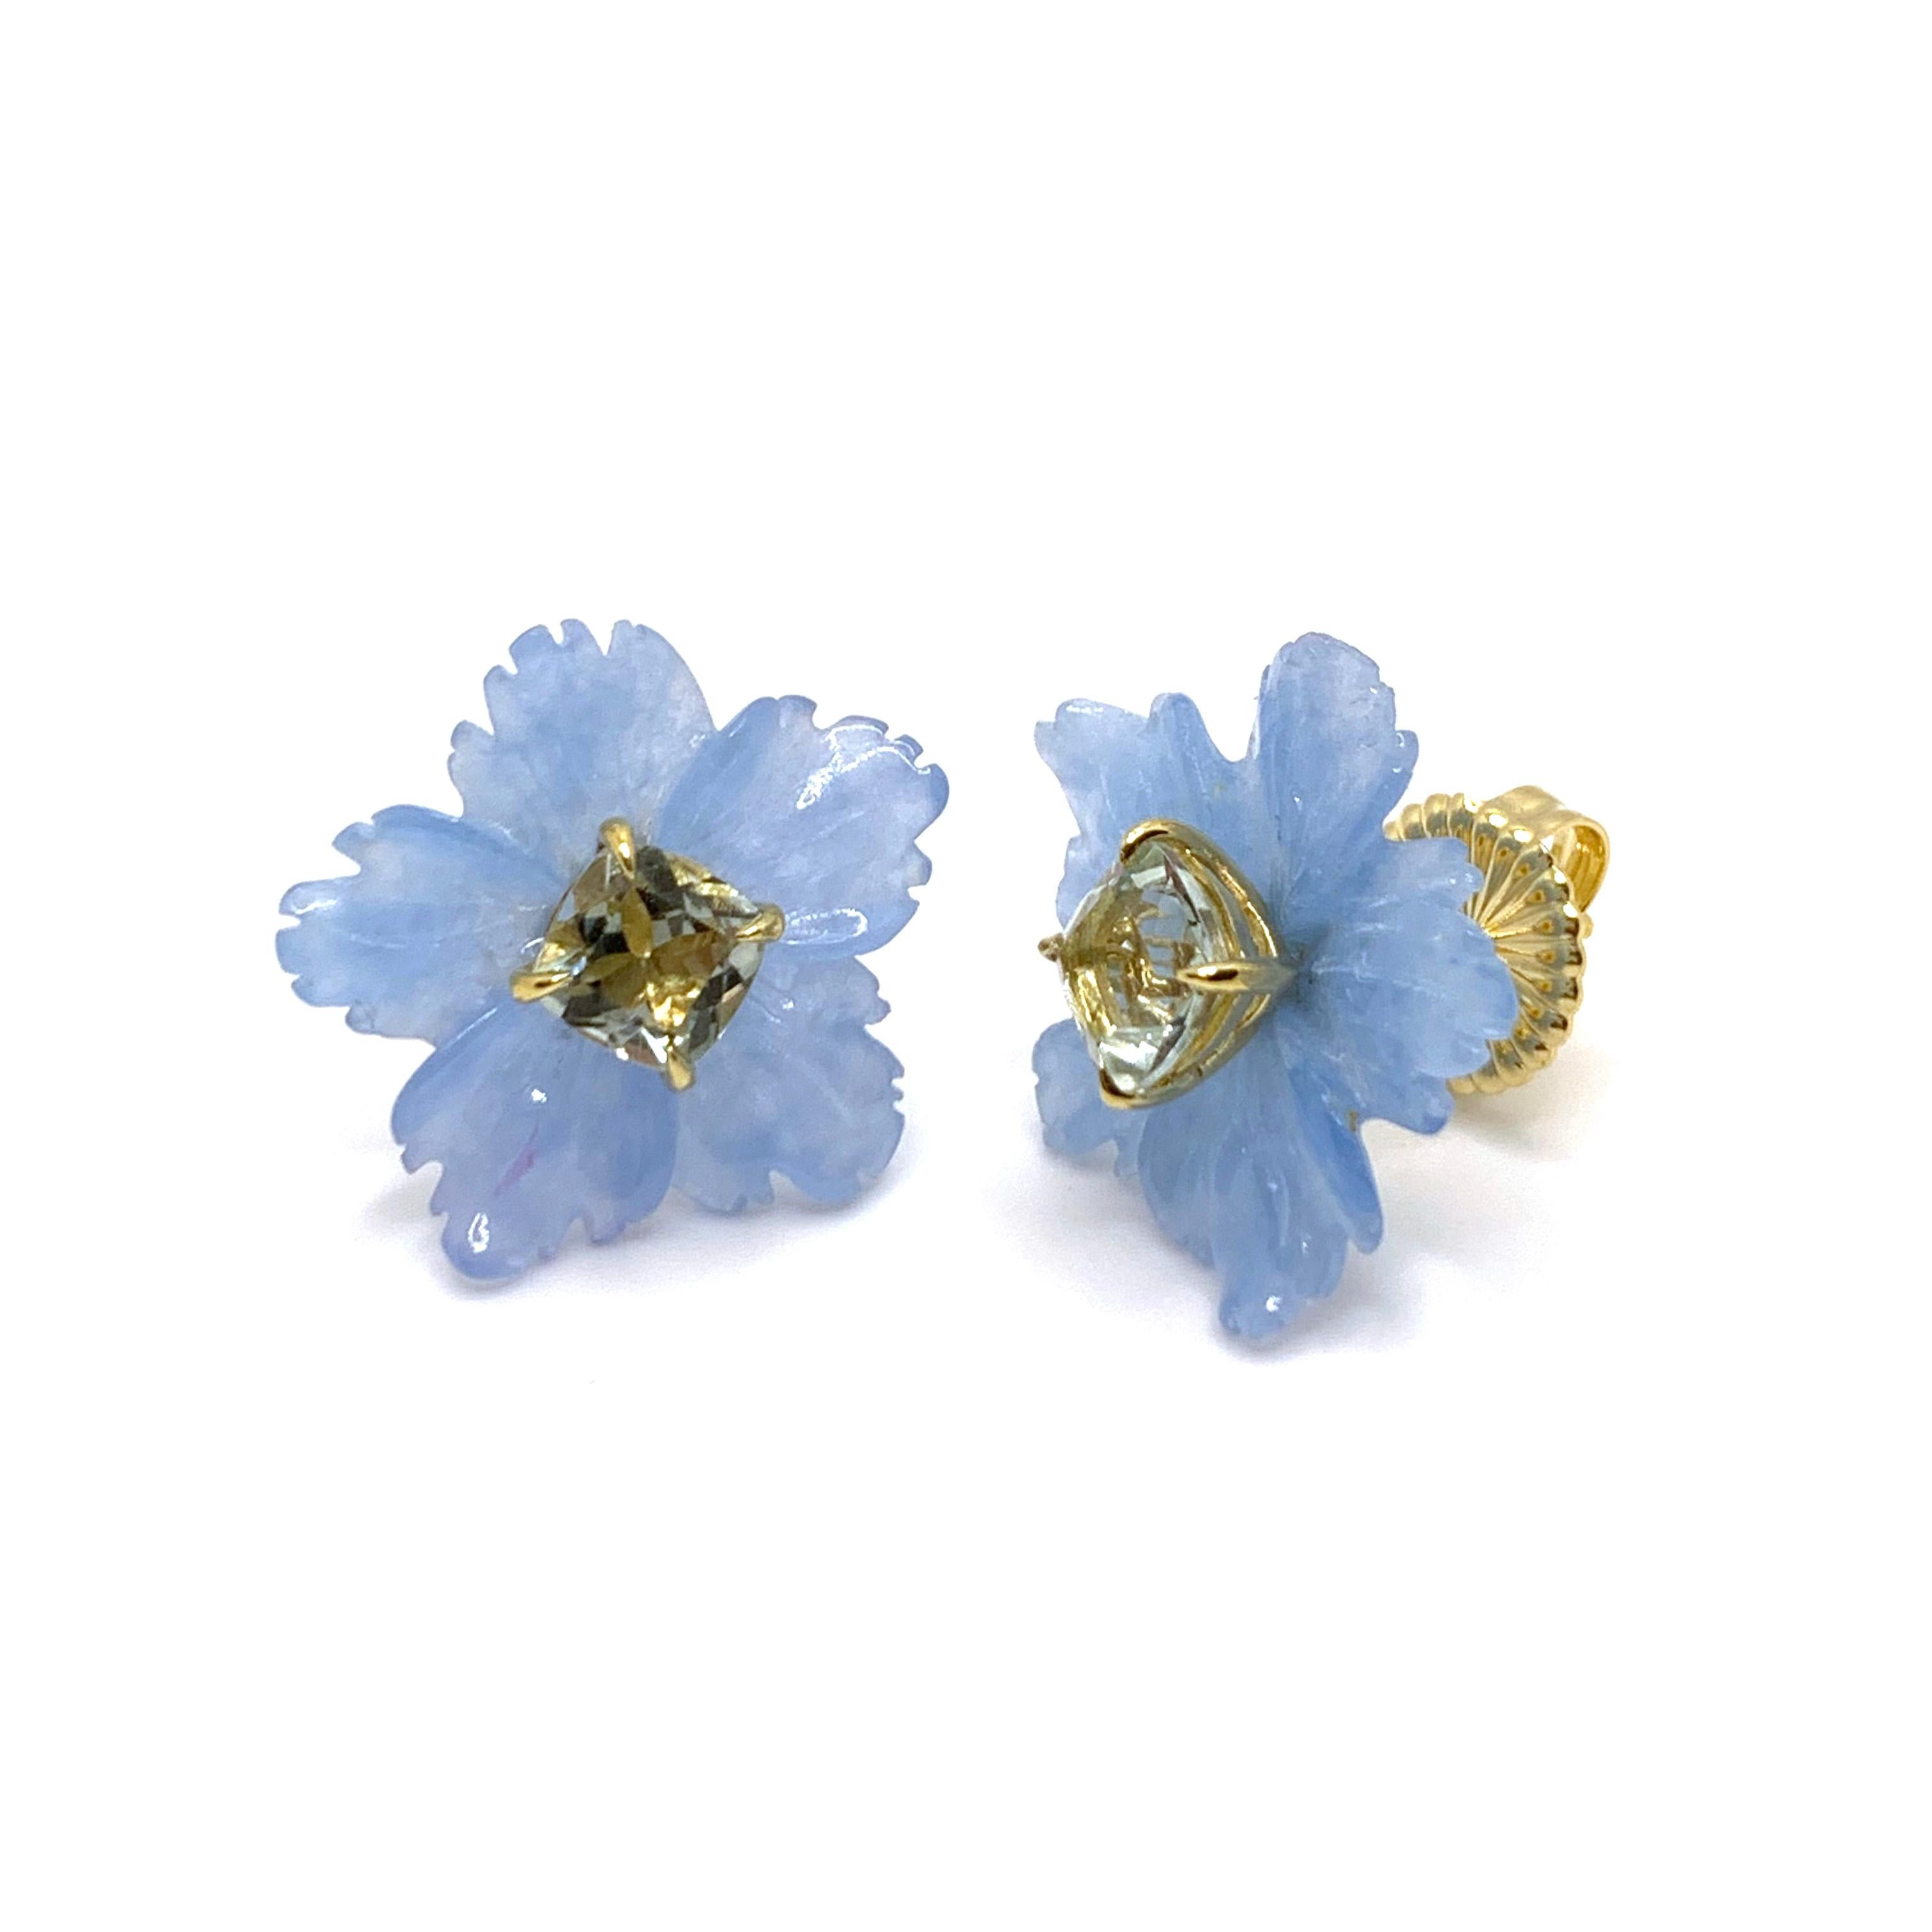 Bijoux Num's 18mm Carved Blue Quartzite Flower and Cushion Green Amethyst Vermeil Earrings

This gorgeous pair of earrings features 18mm blue quartzite carved into beautiful three dimension flower, adorned with genuine cushion-cut green amethyst